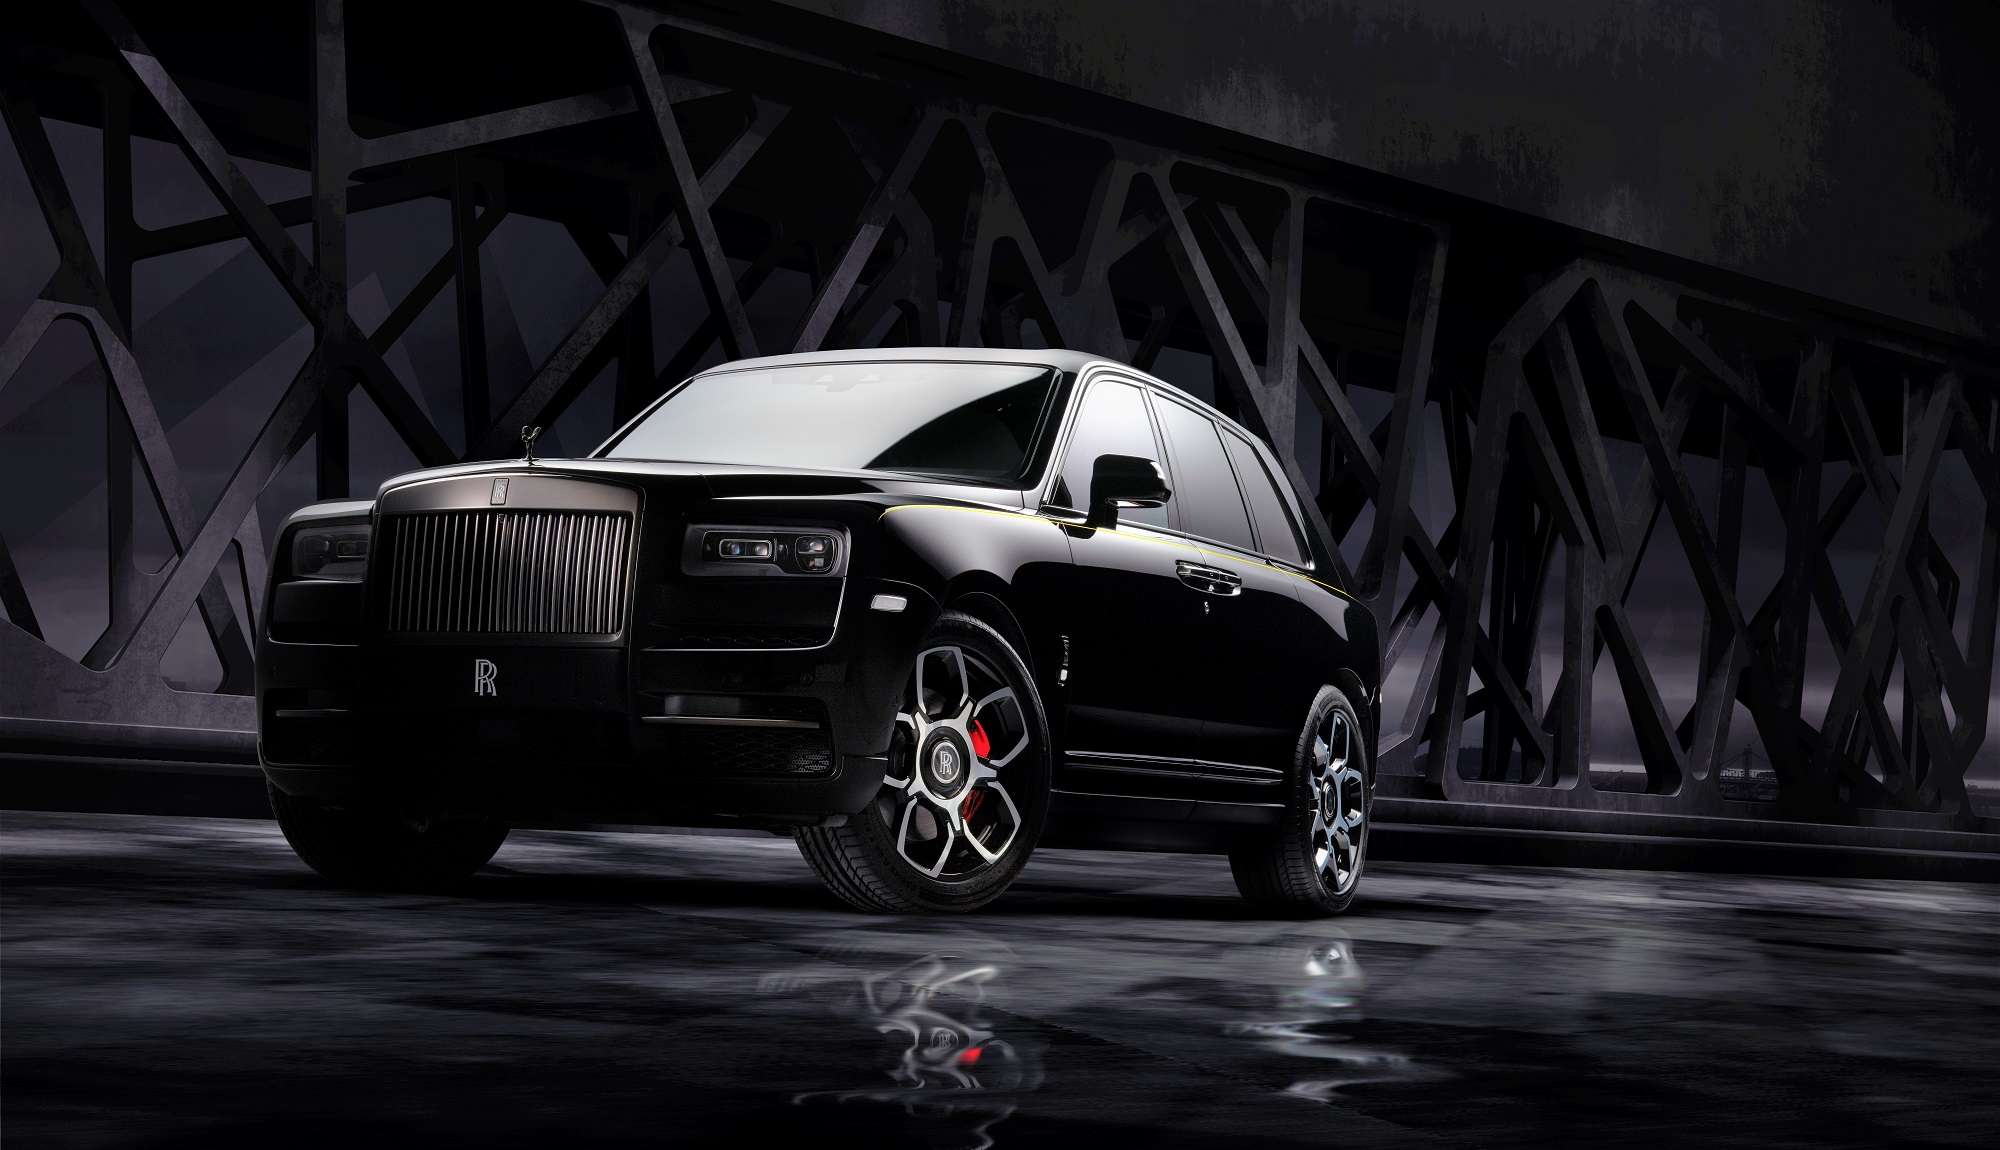 Rolls Royce Suv: Rolls Royce launches Cullinan Black Badge SUV in India, priced at Rs 8.2 crore, ET Auto